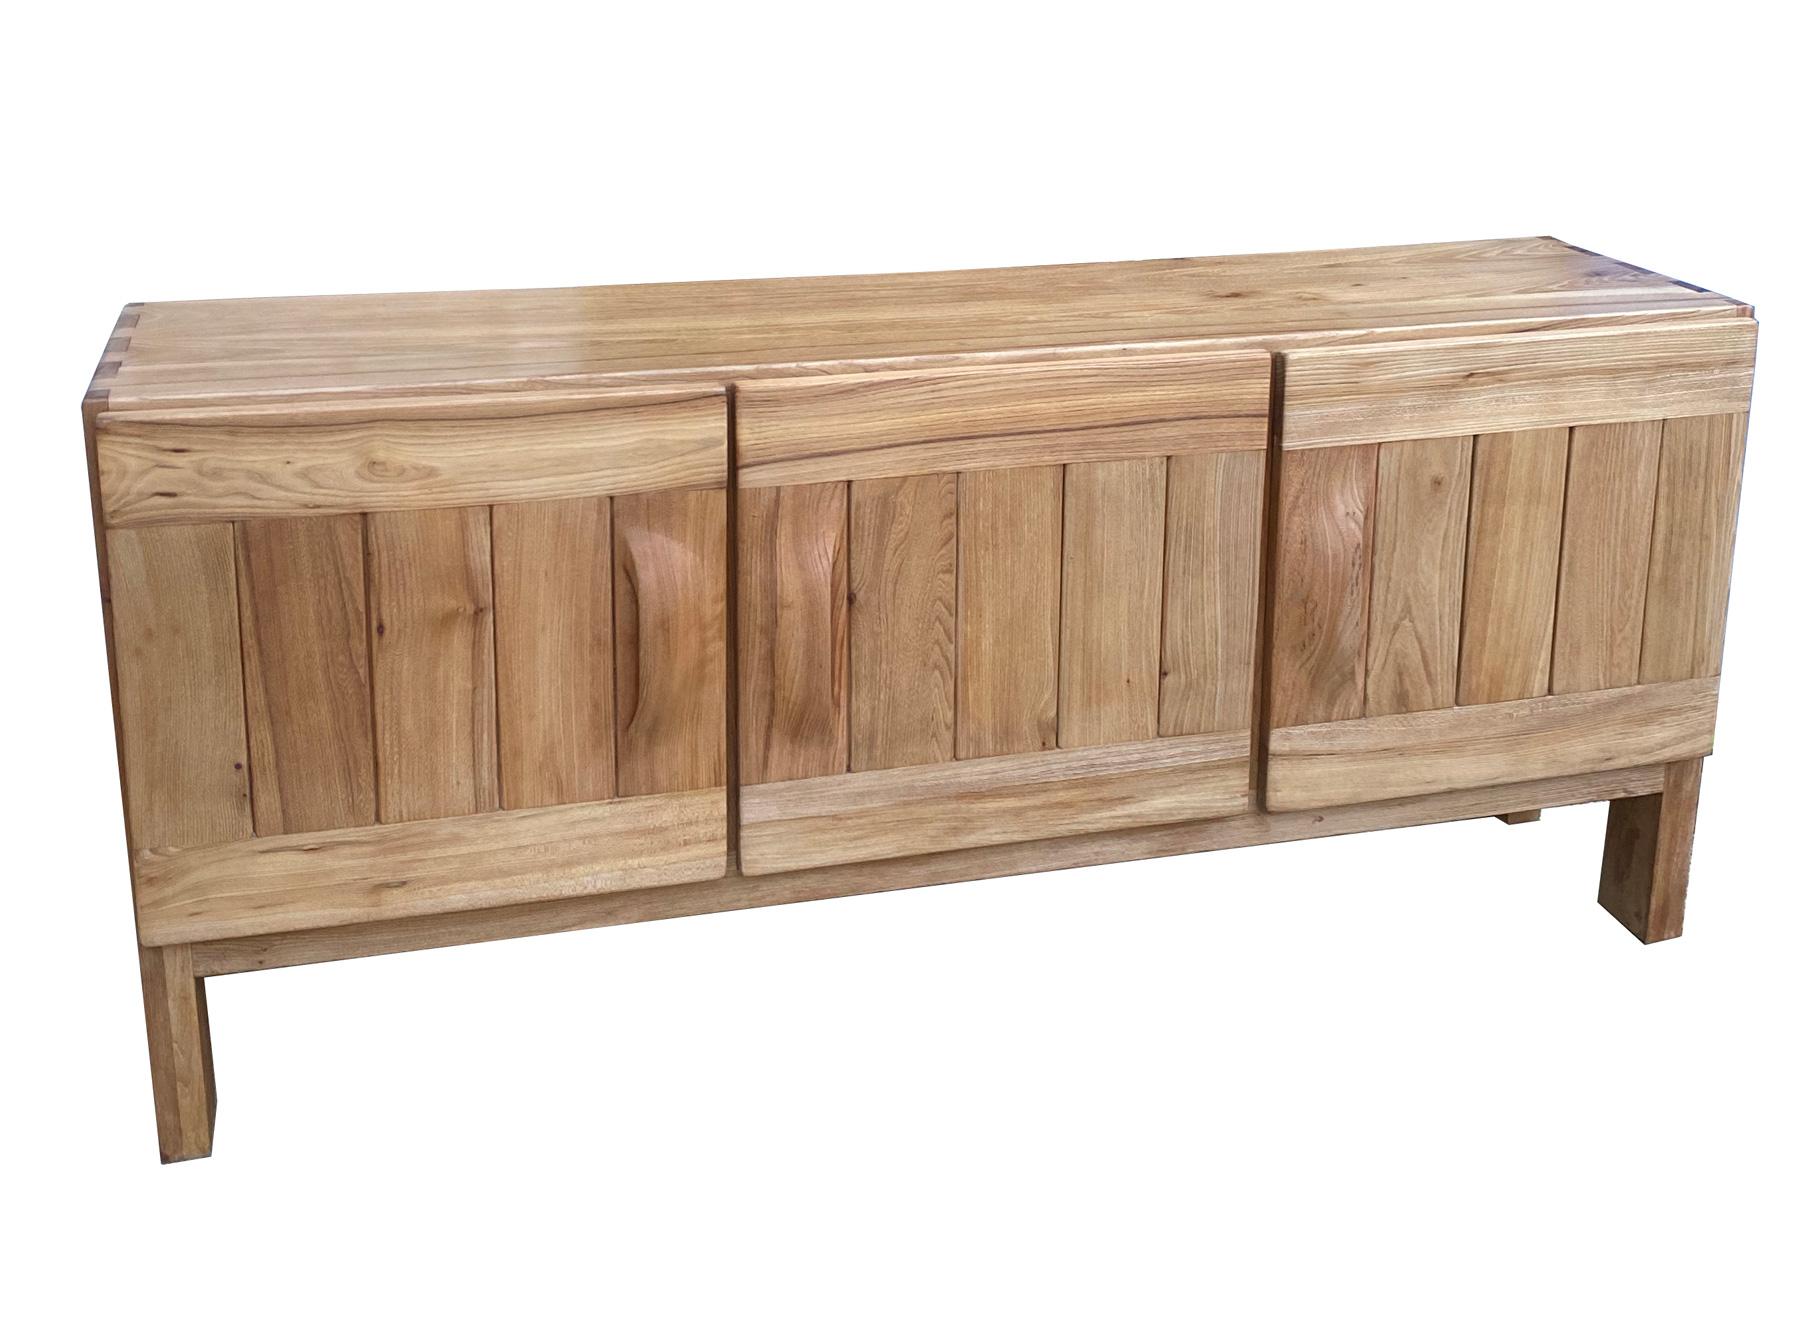 Roland Haeusler, Maison Regain Brutalist sideboard elm
Maison regain was a manufacturer of furniture in France during the 1960s, 1970s and 1980s, mostly involved in the production of elm furniture. Maison regain originated in the Haute-Alpes region